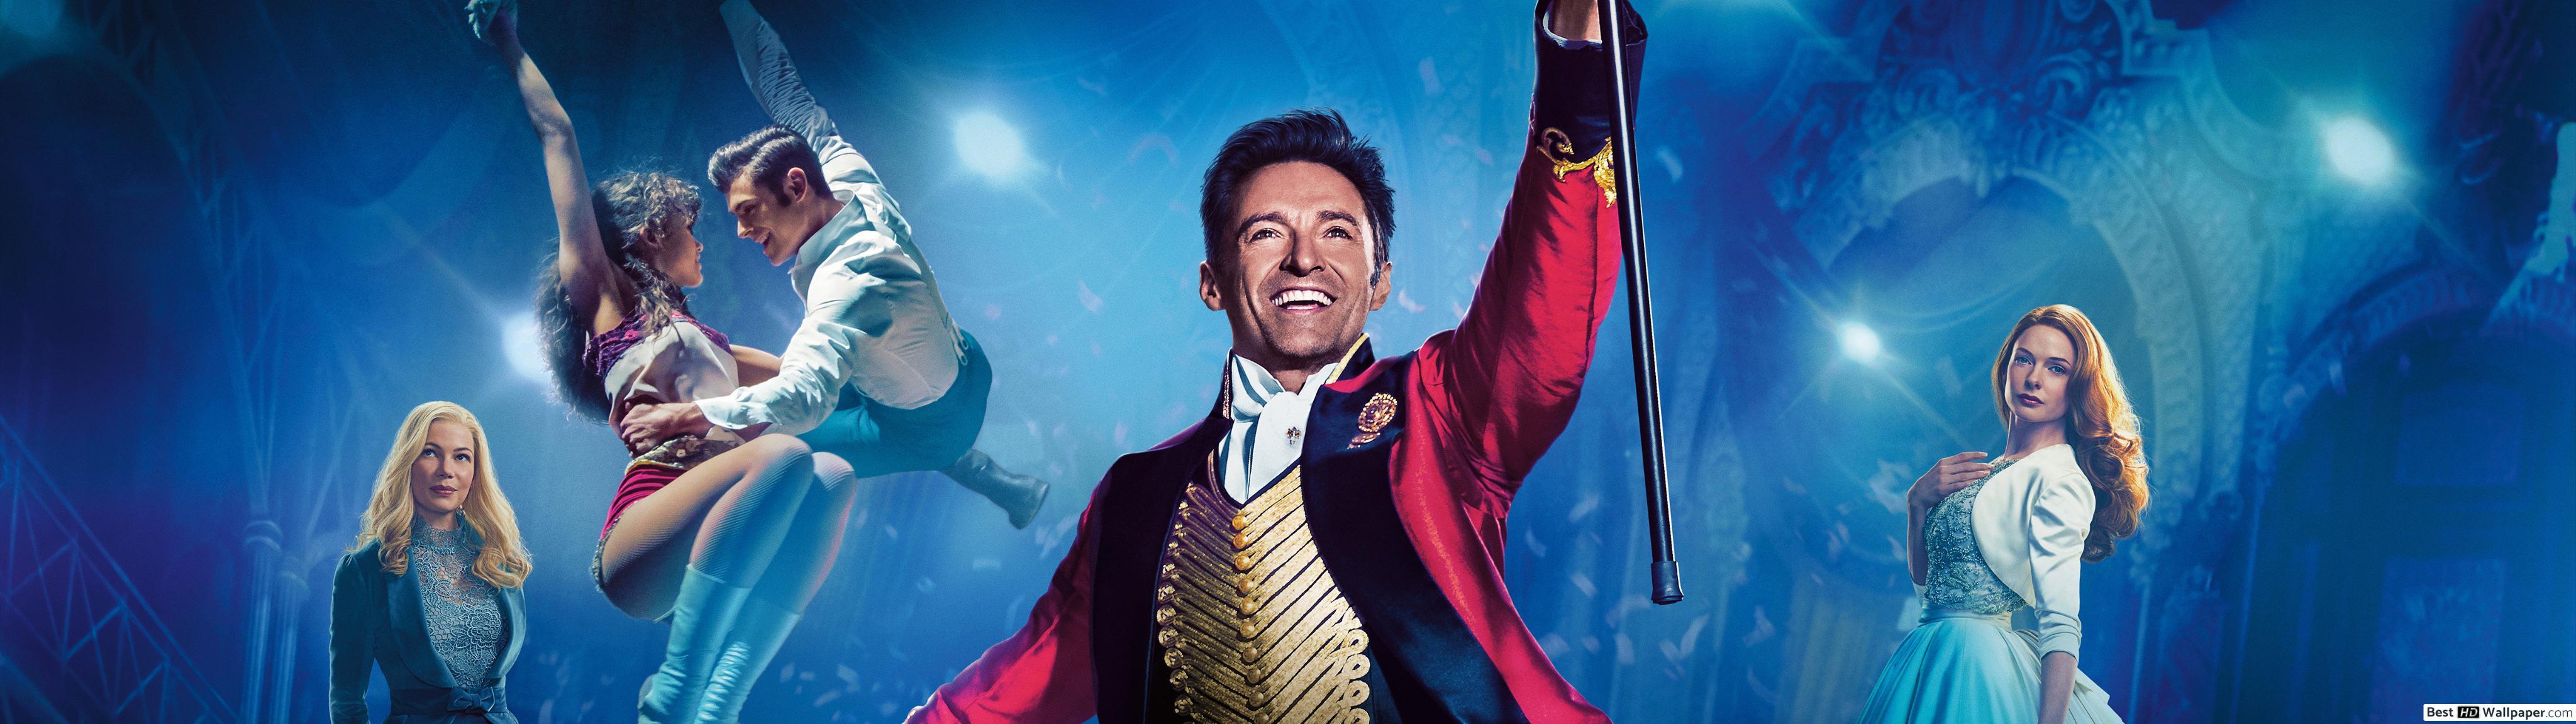 The greatest showman HD wallpaper download